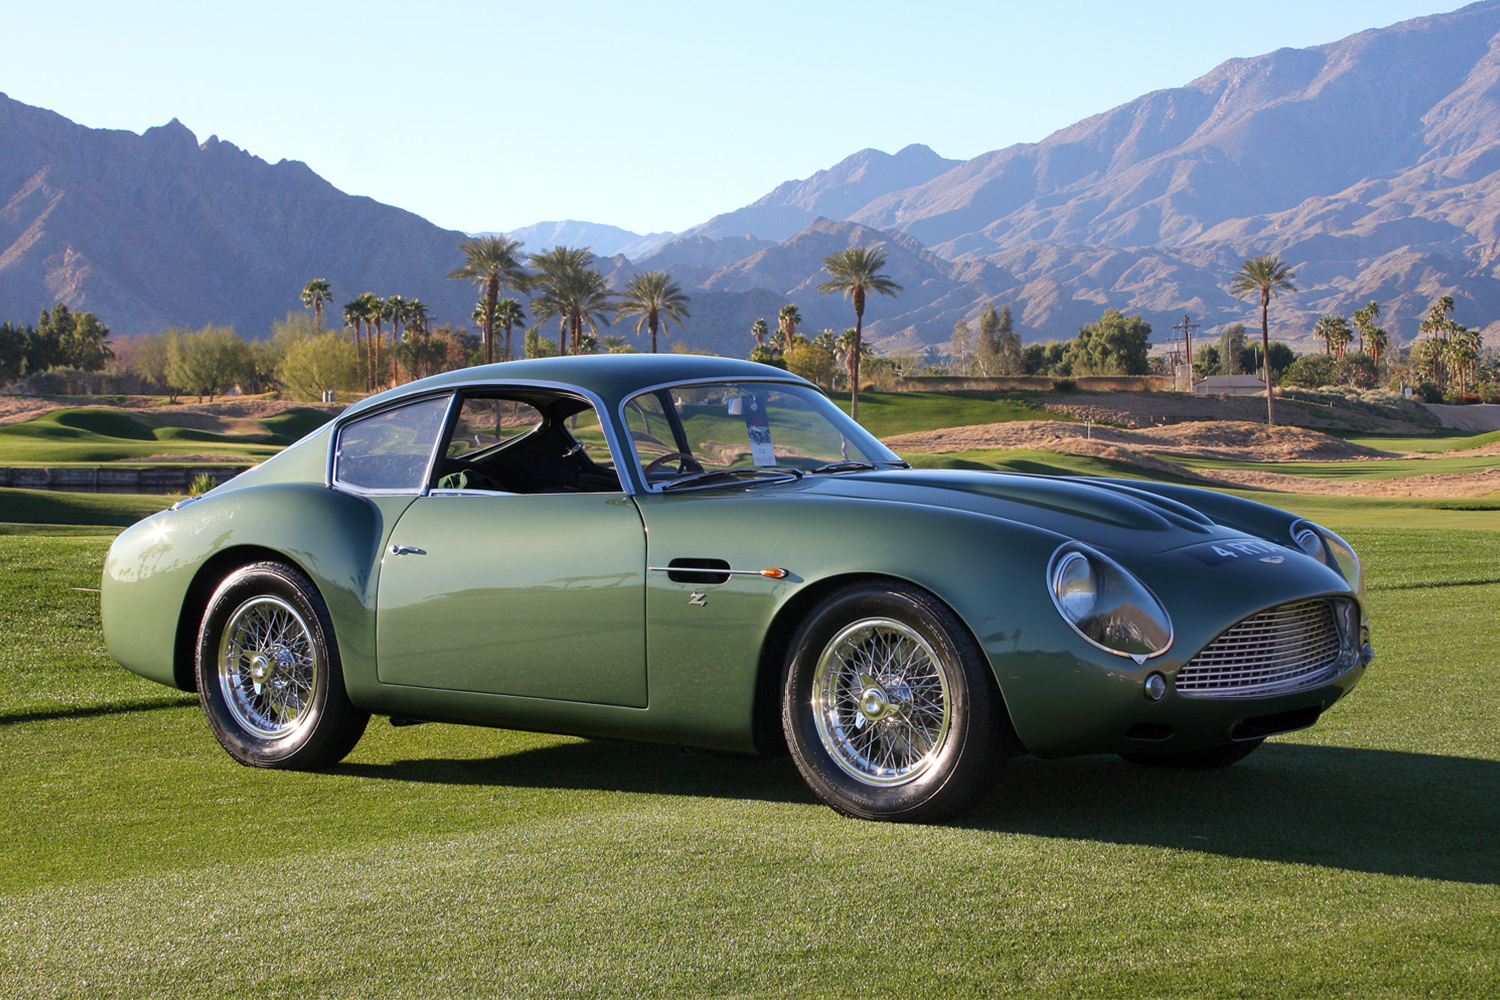 A green 1961 Aston Martin DB4 GT Zagato sports car sitting on a golf course with mountains in the background